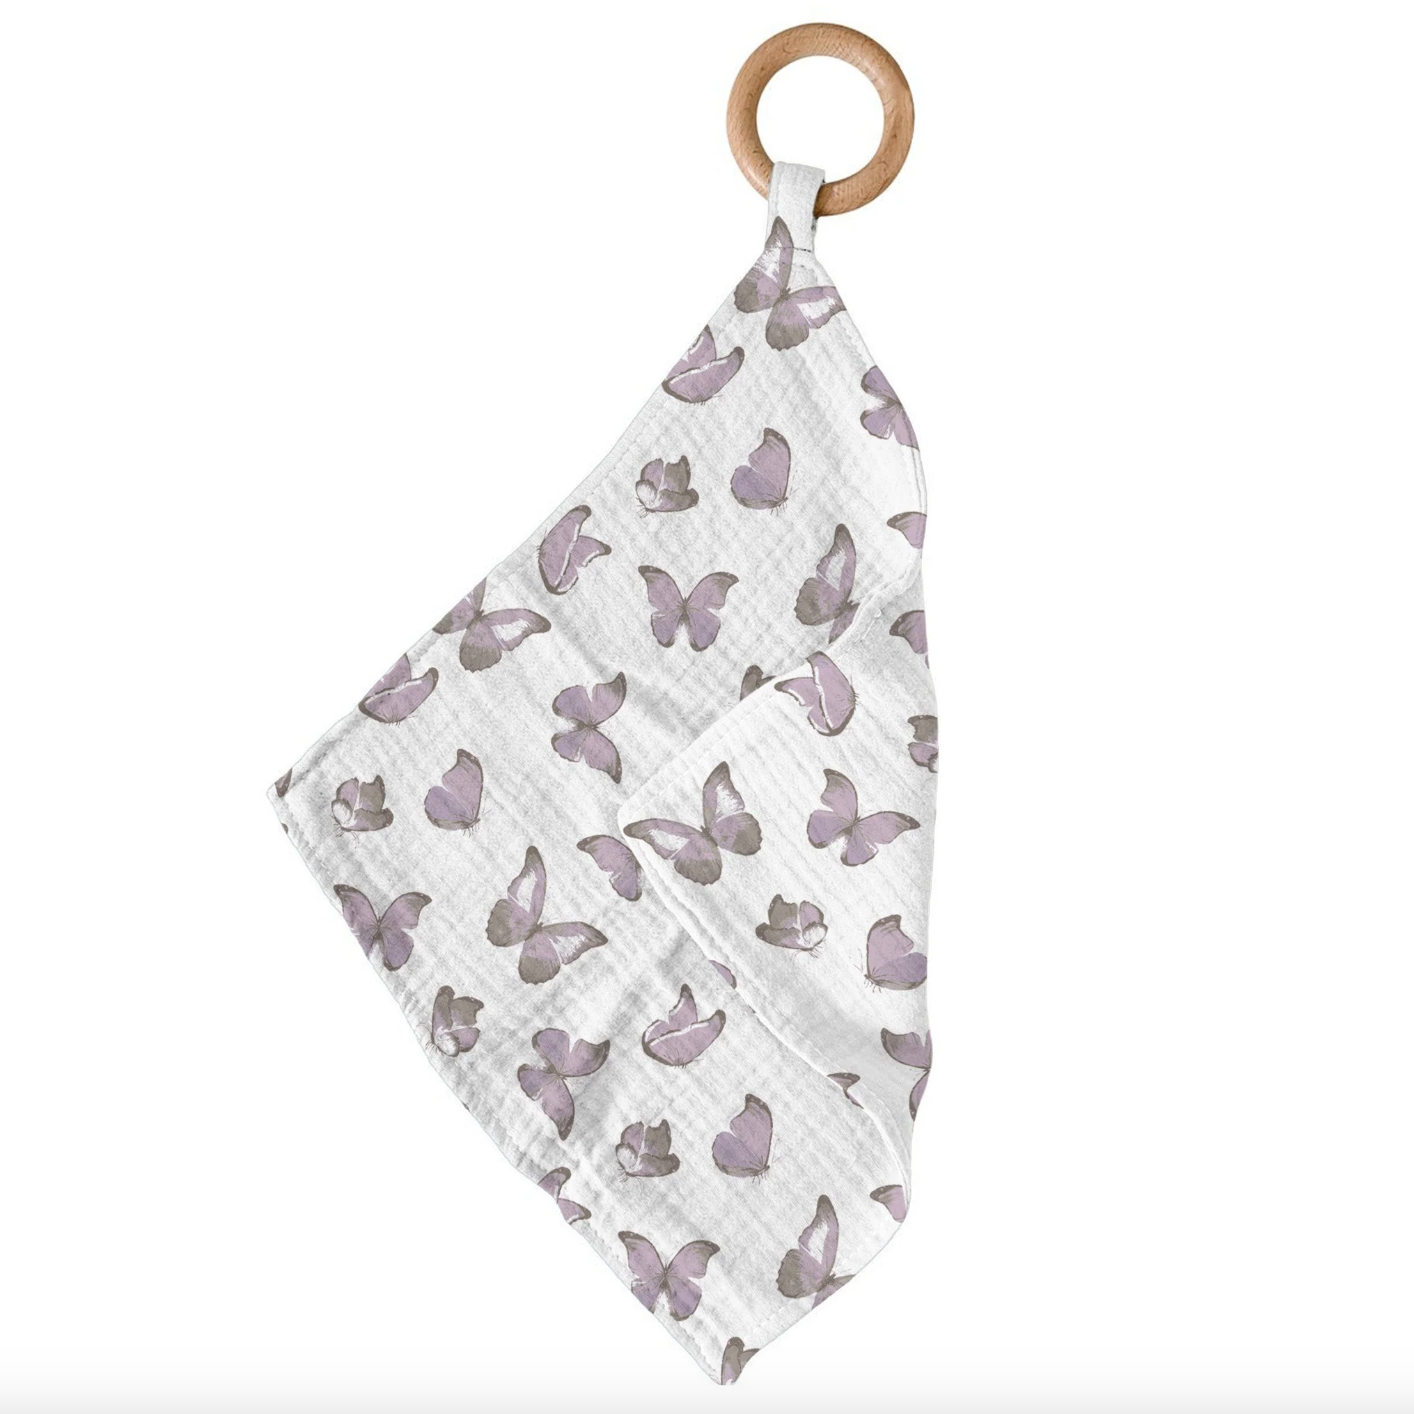 Newcastle Classics Winsome Butterflies Teether